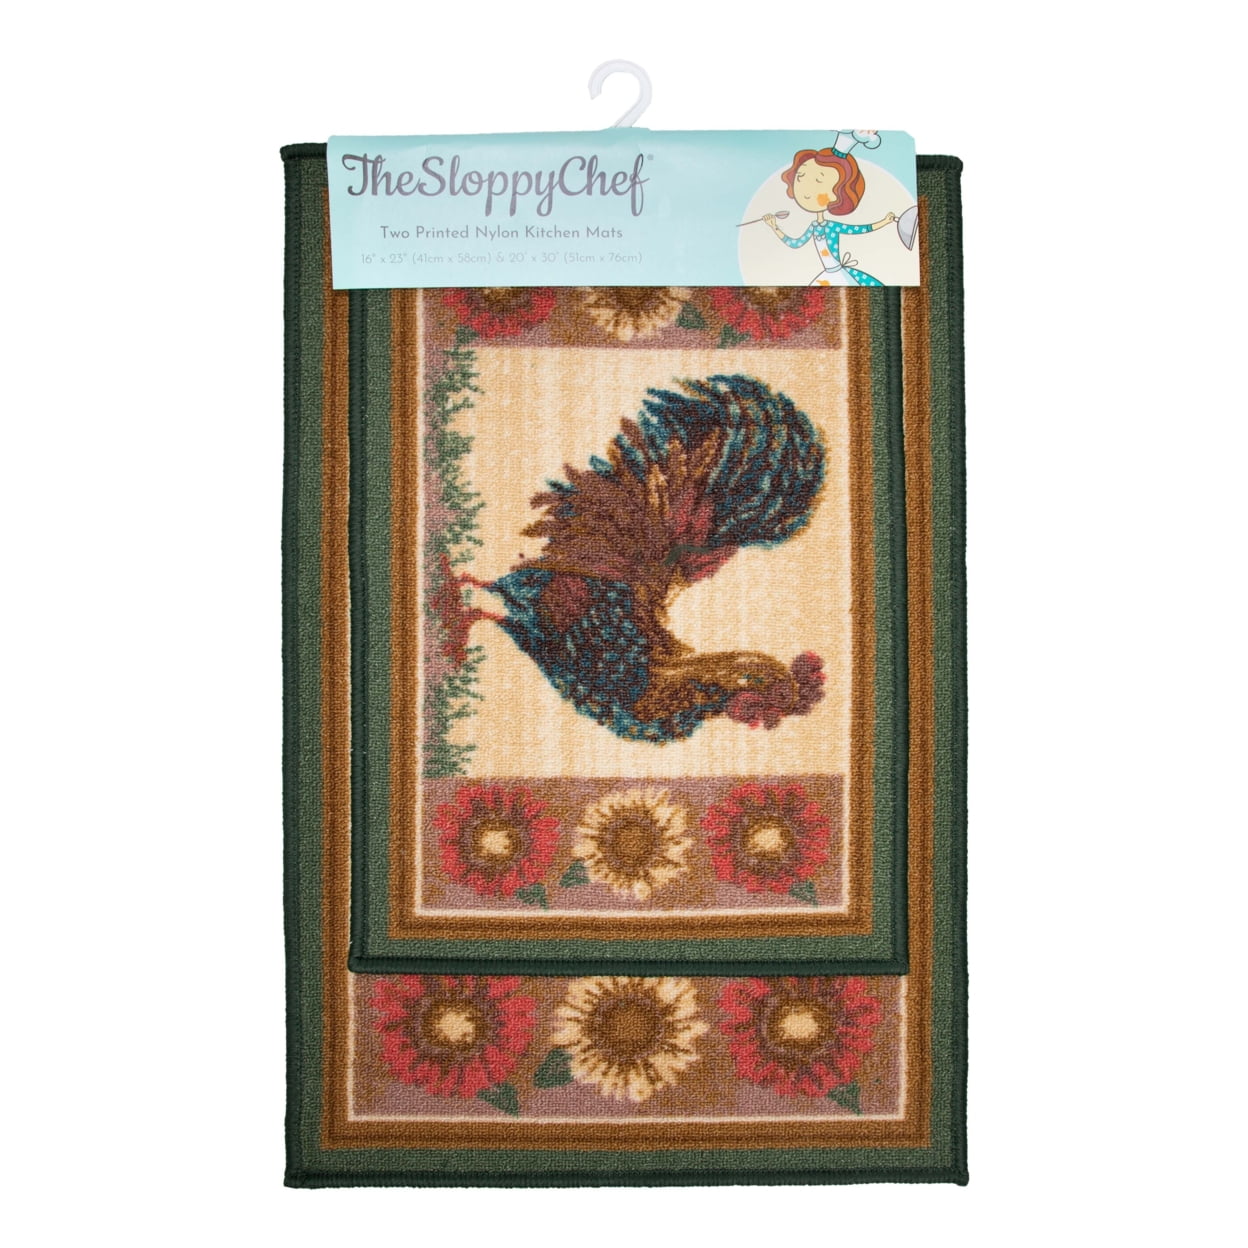 Sloppy Chef Printed Kitchen Area Rug Size Options 20x30 or 